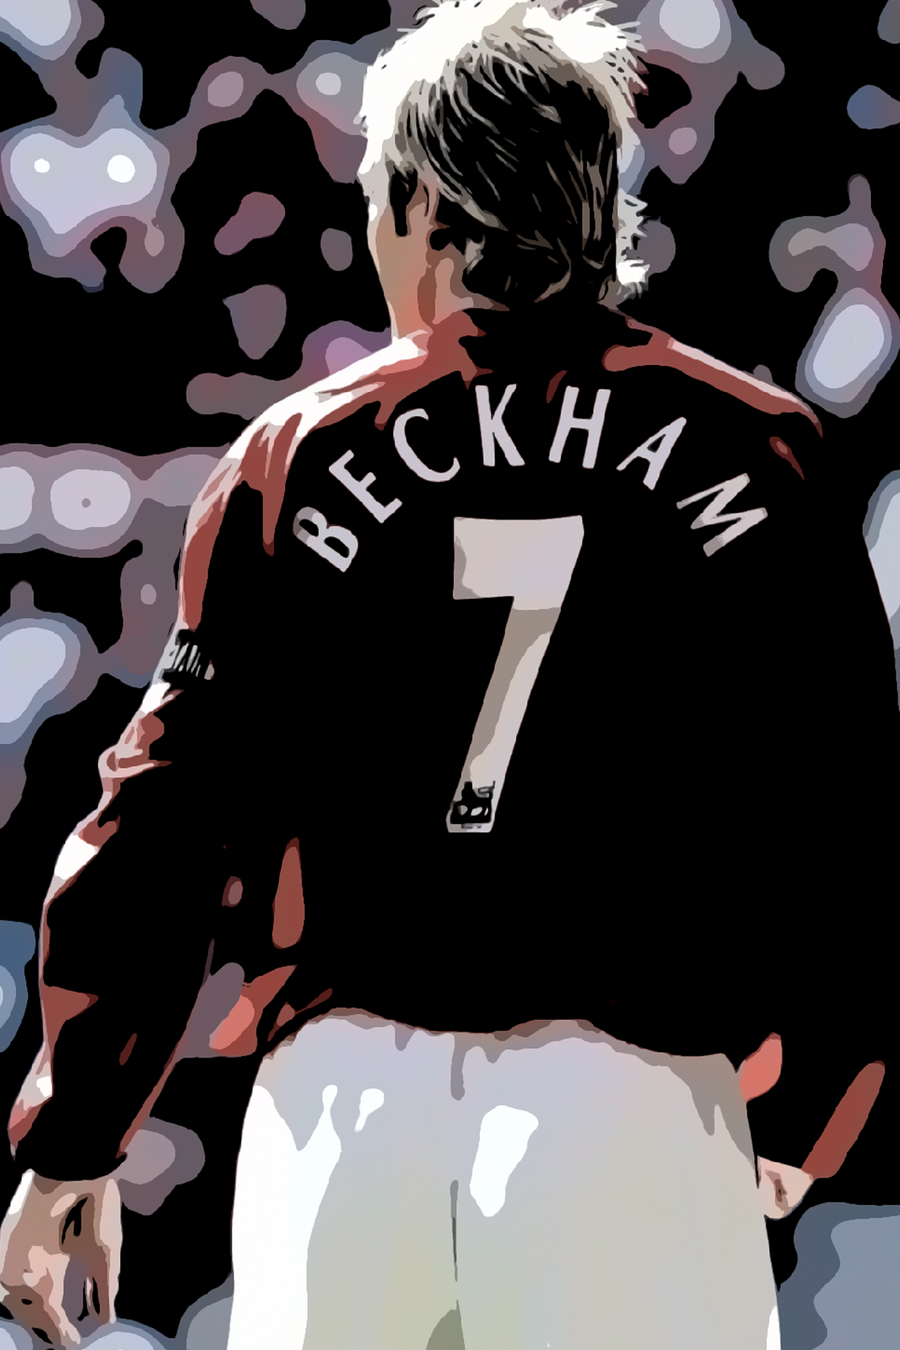 David Beckham's no.7 - 100% Hand Painted Oil on Canvas Art Painting